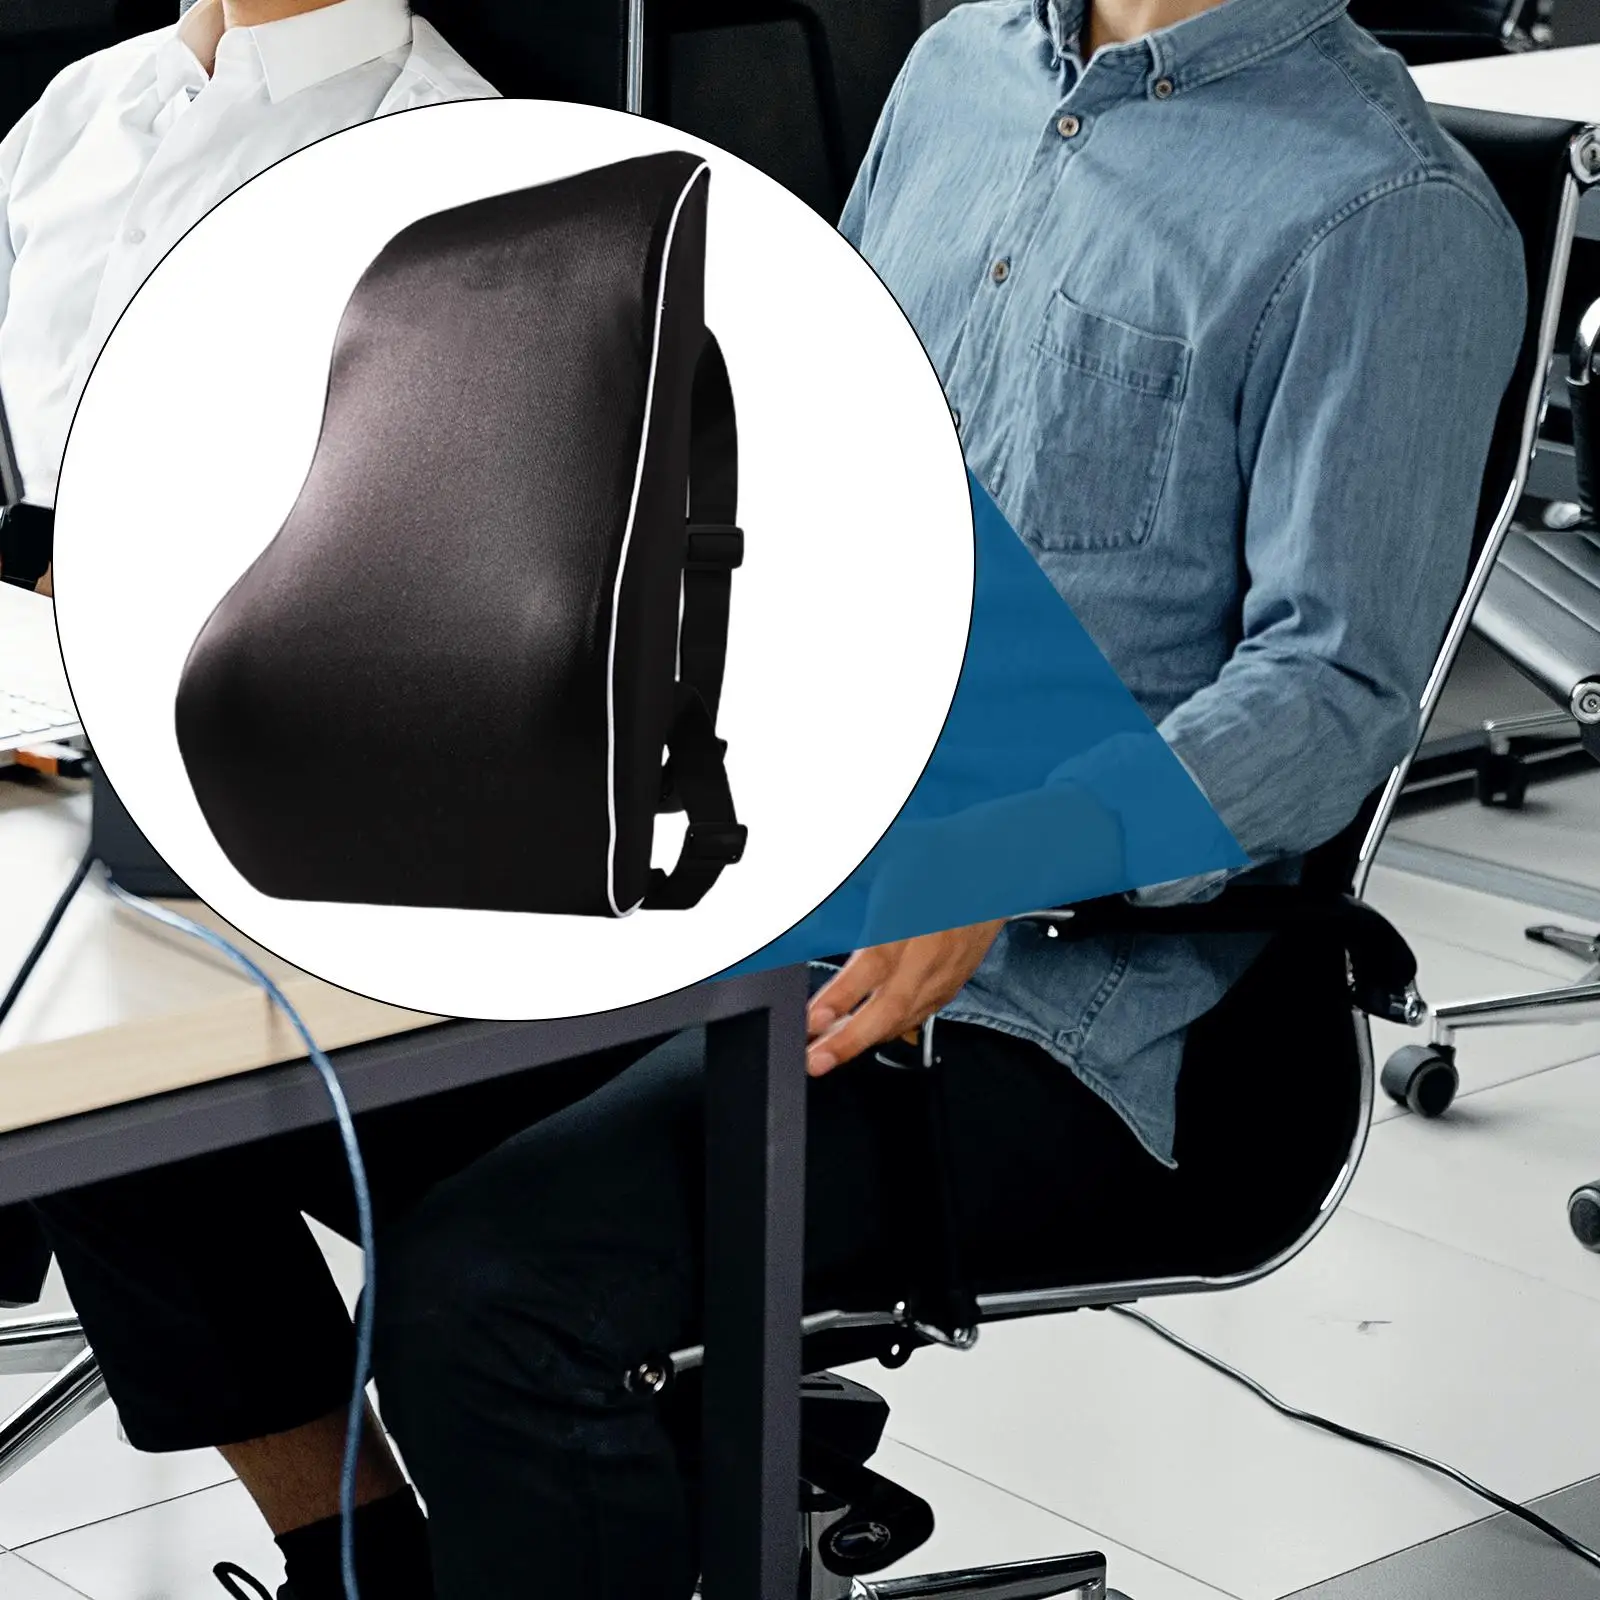 Pillows Improve Posture Comfort for Office Chair Teachers Students